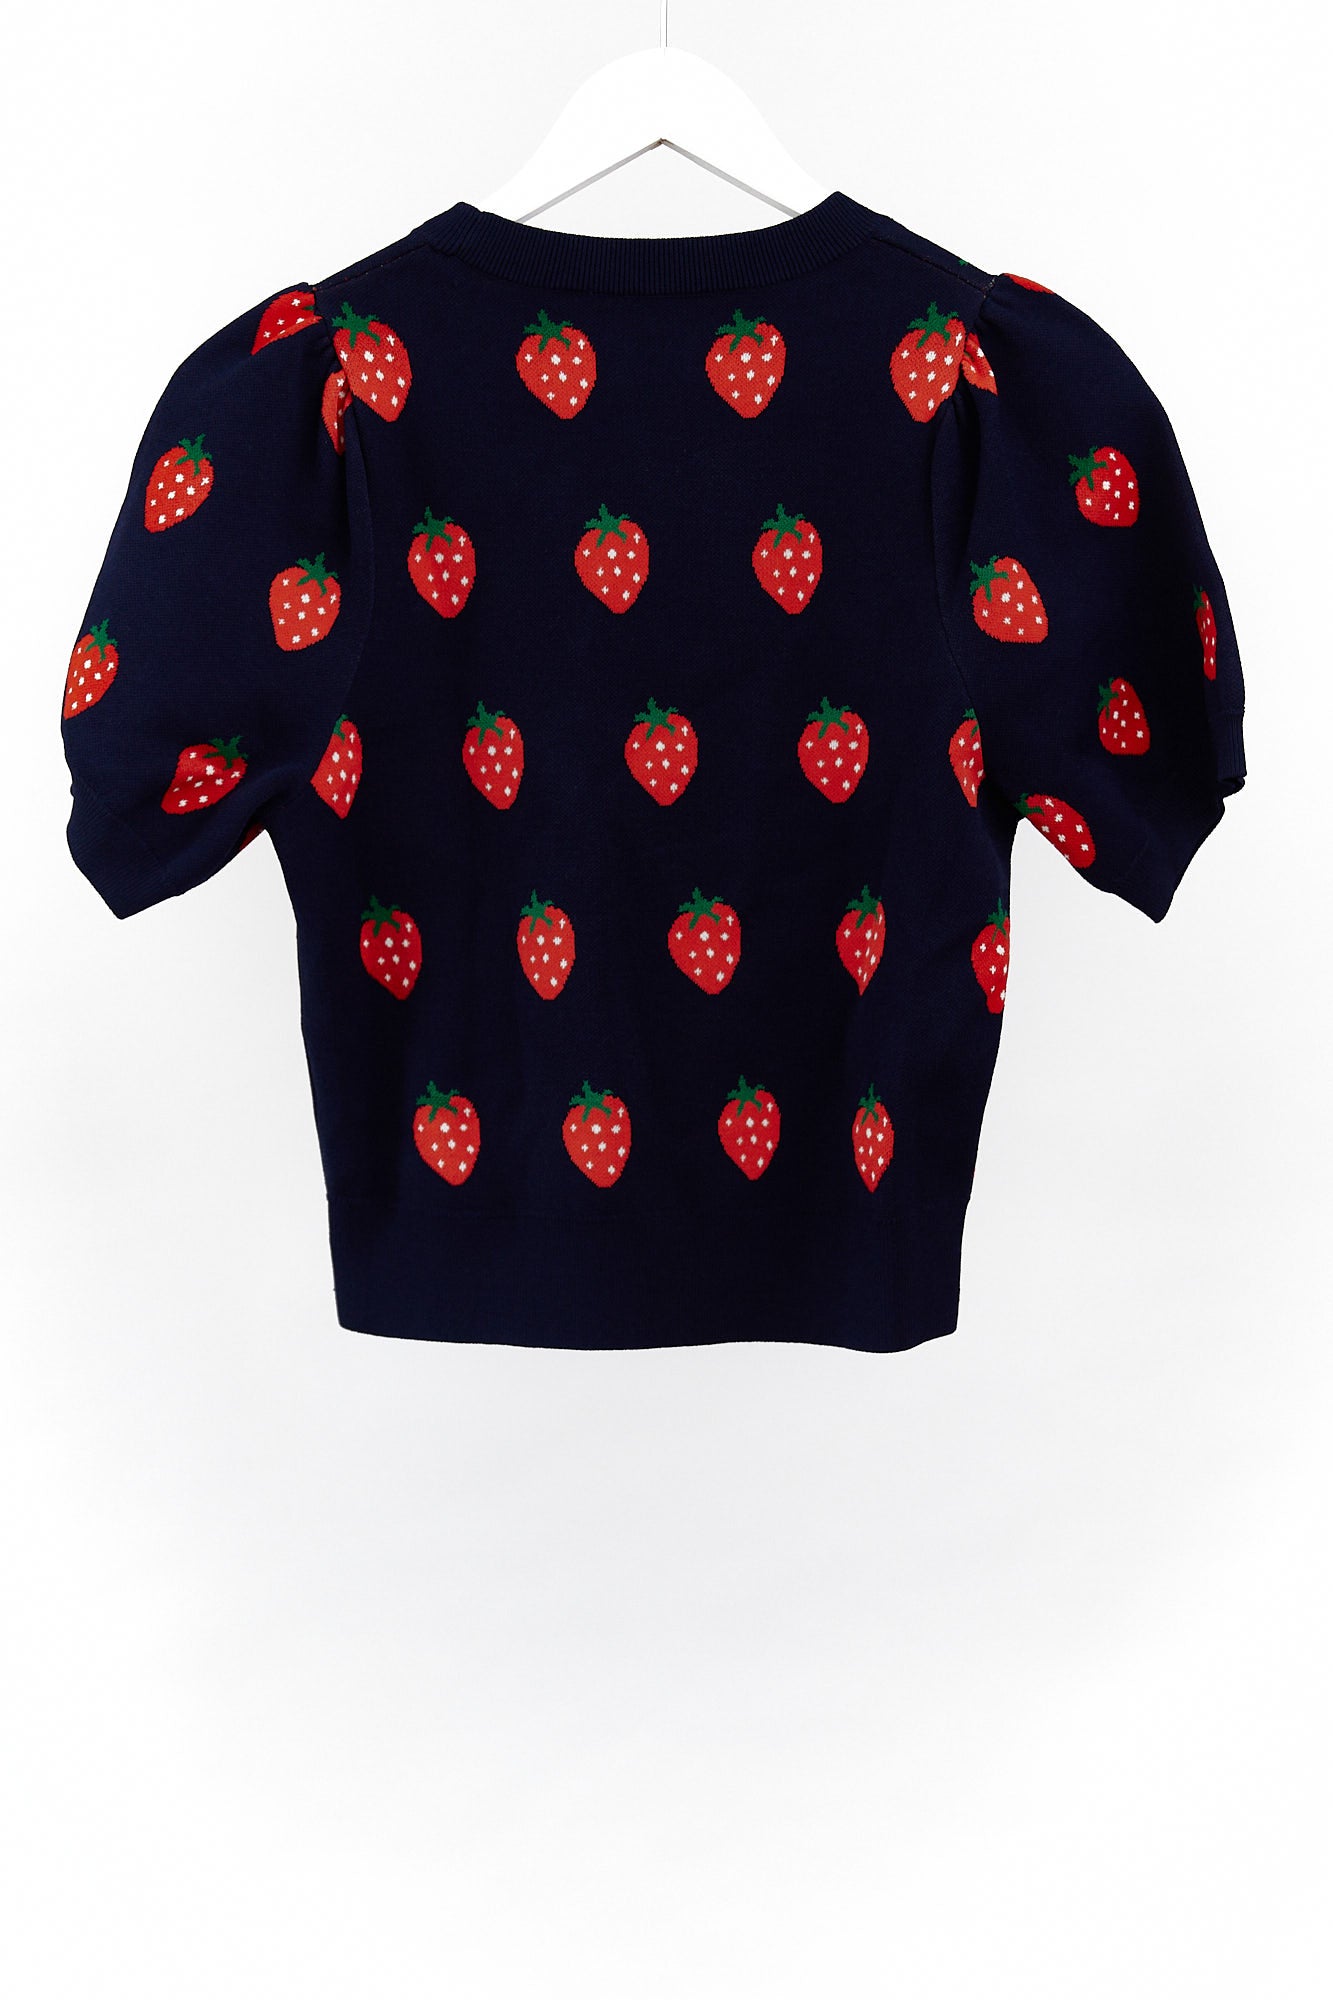 Womens & Other Stories strawberry knit cropped sweater size extra small